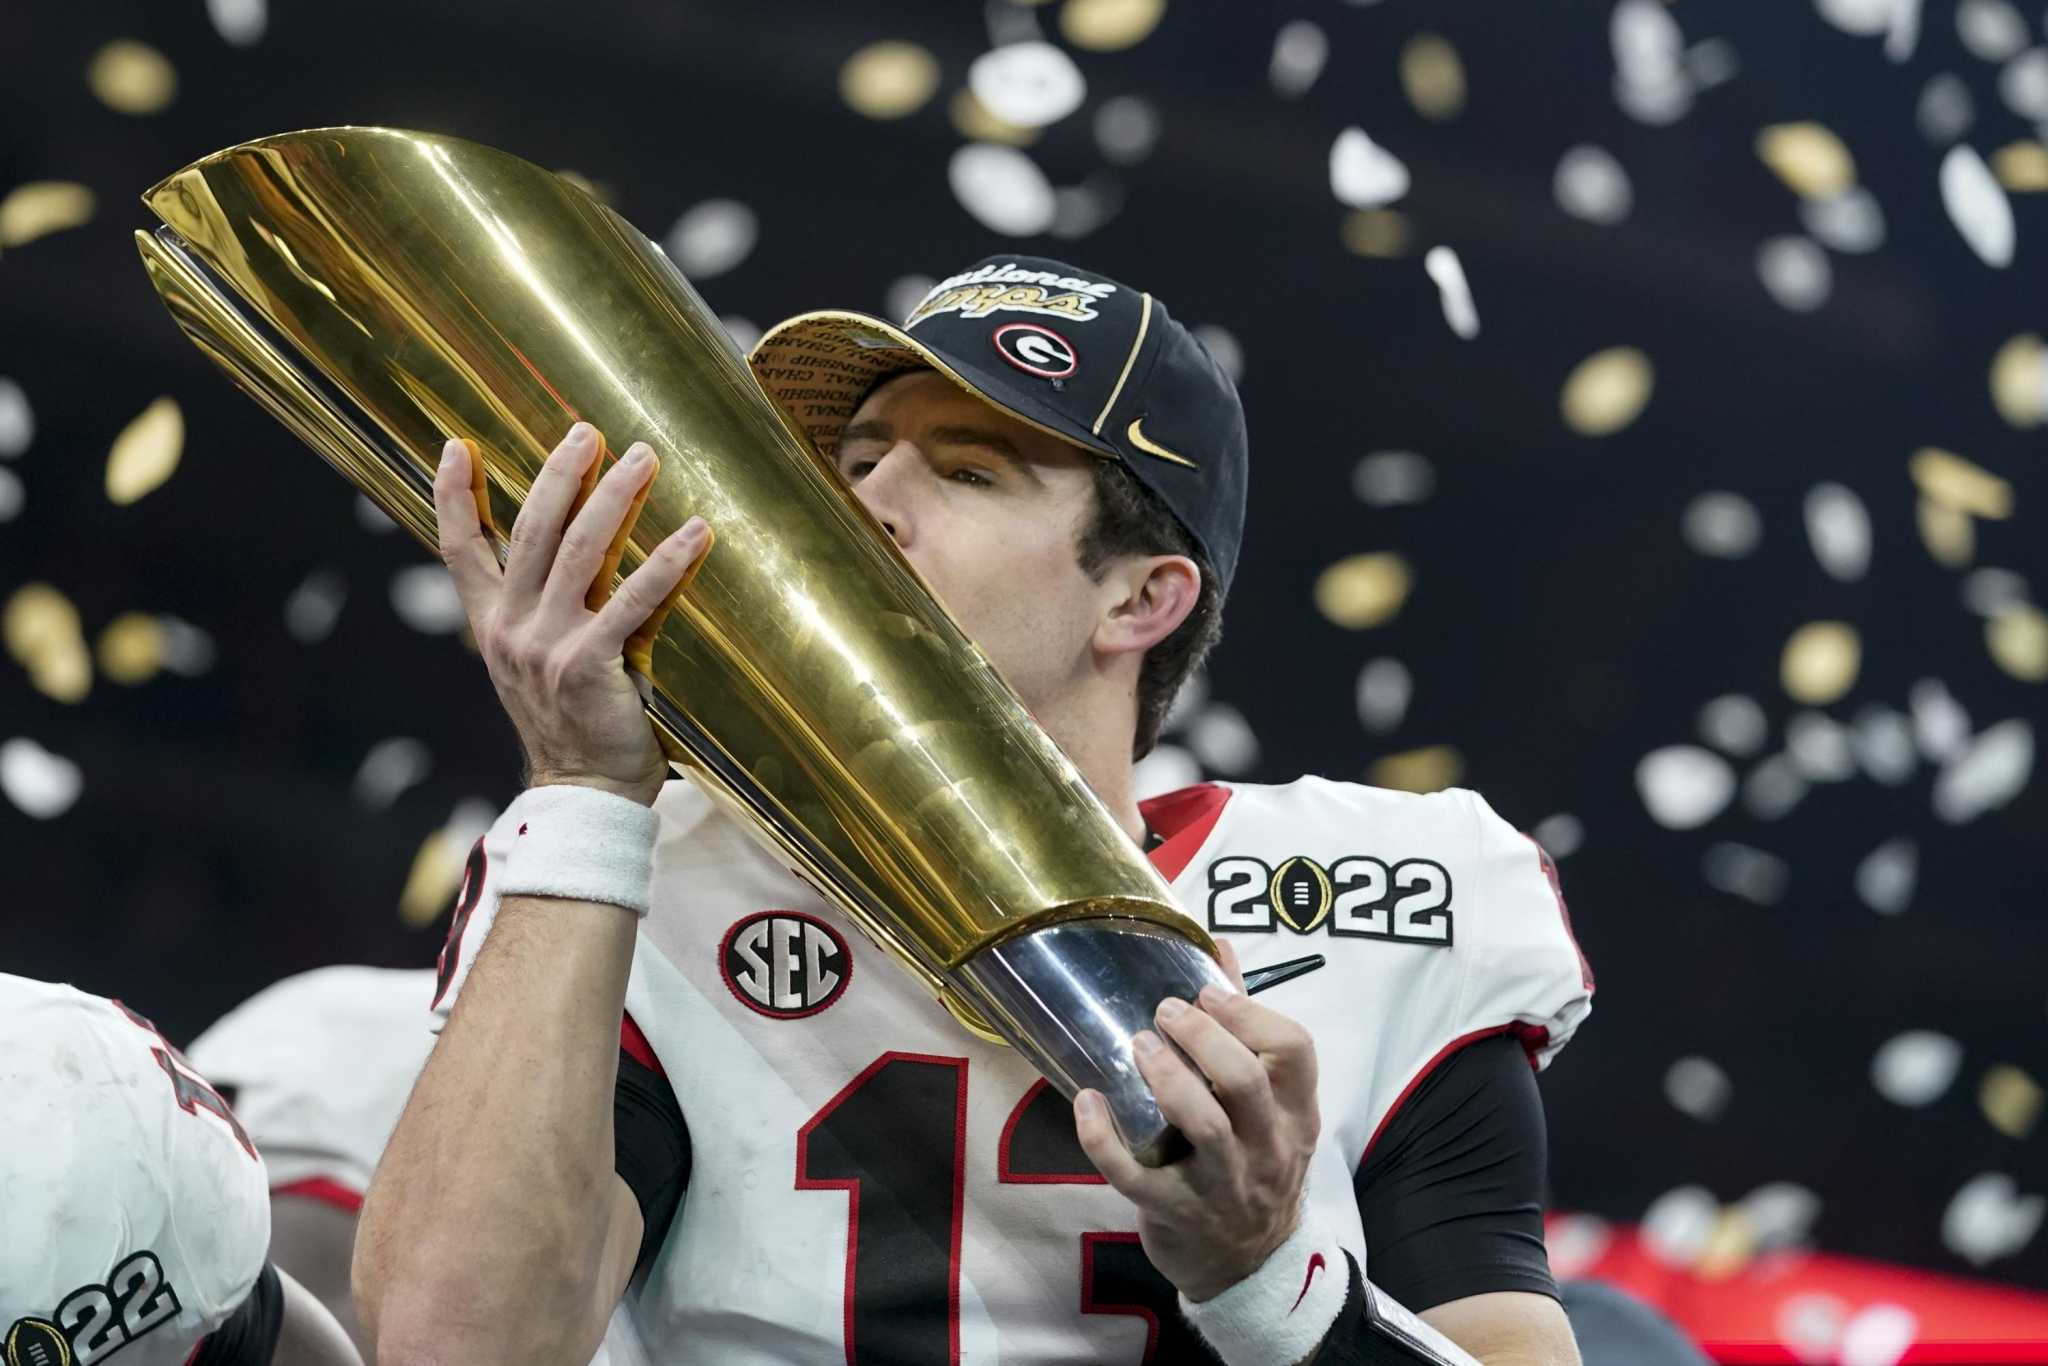 College Football Playoff schedule unveiled for 12-team field in 2024, 2025